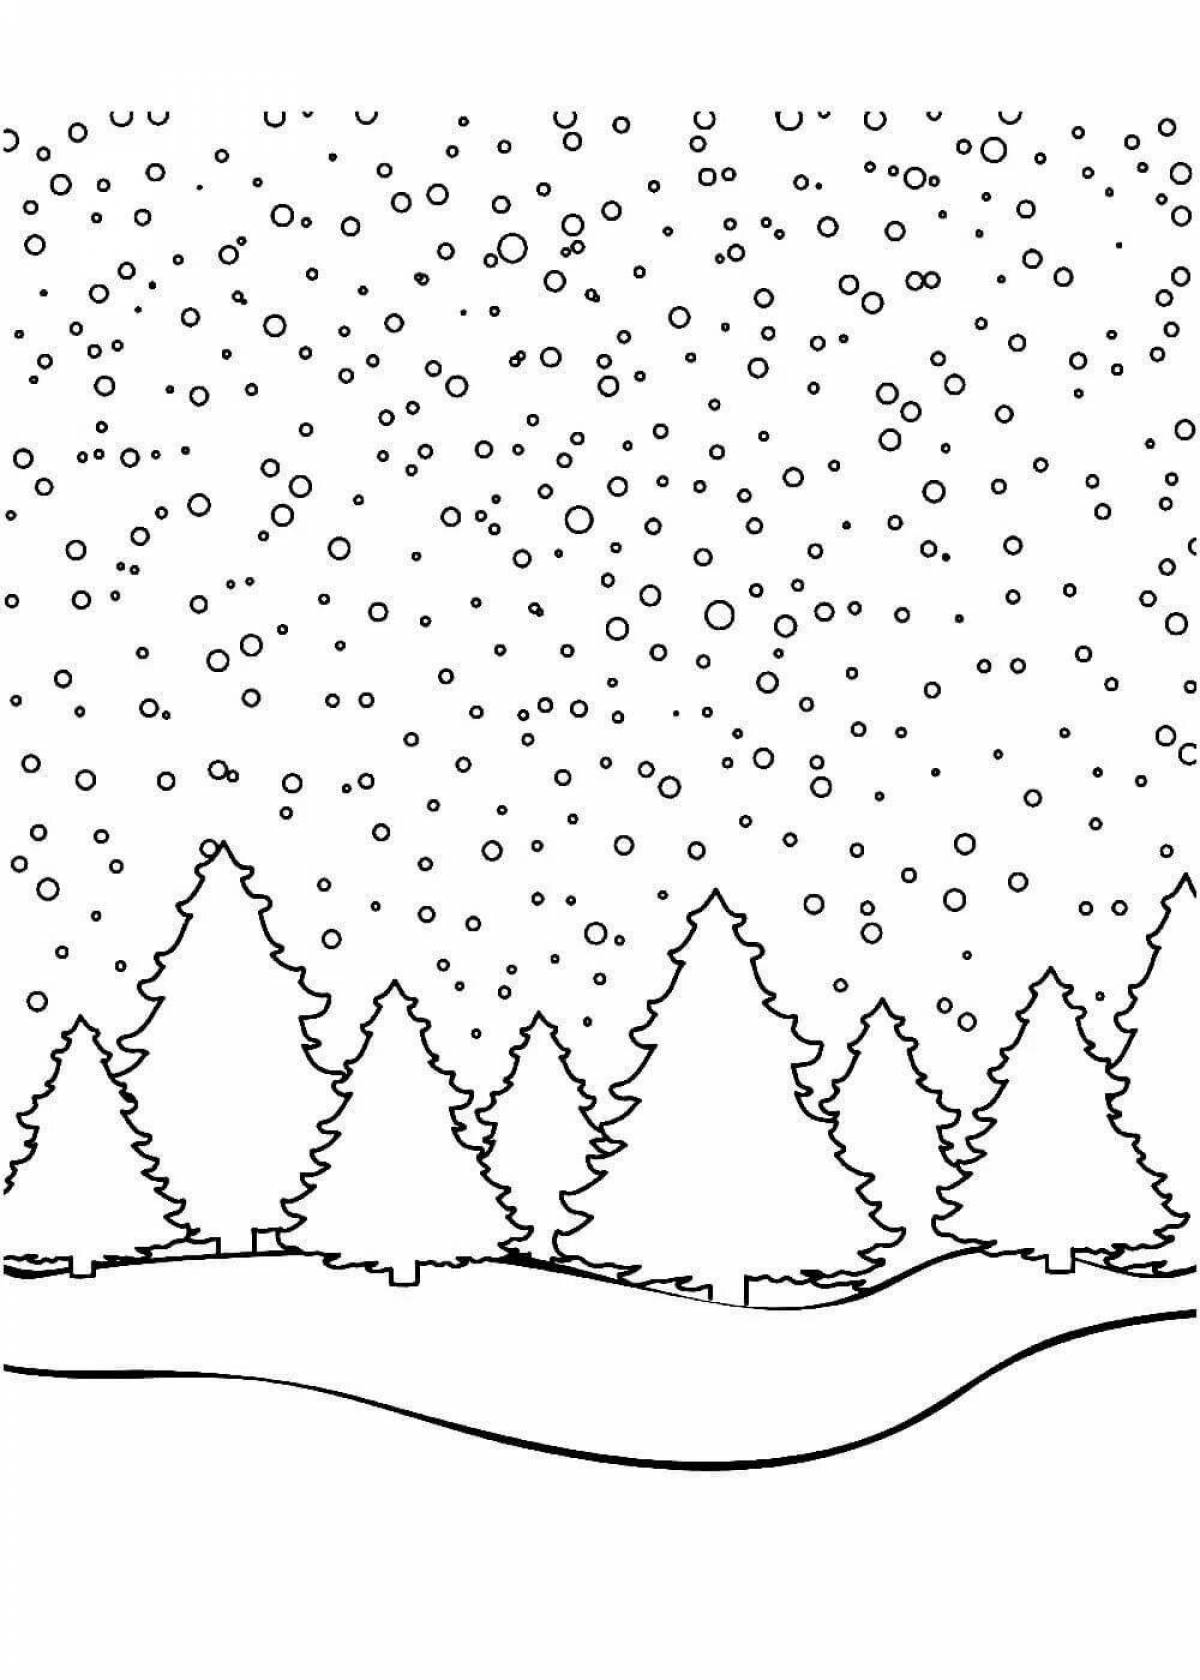 Adorable blizzard coloring book for kids